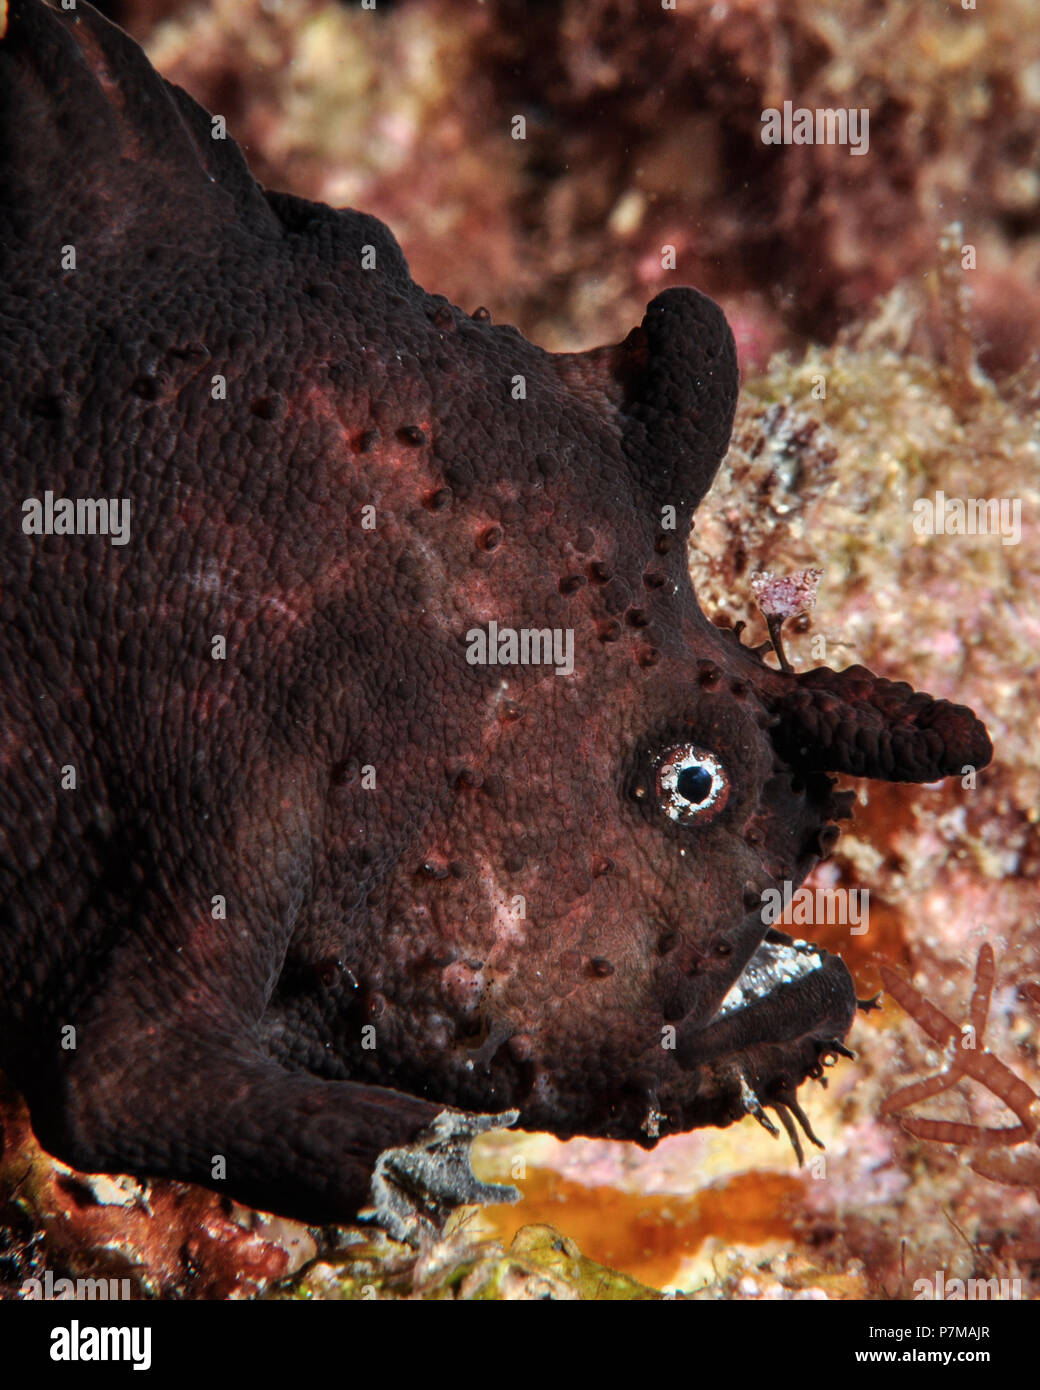 Side Portrait of a White Spotted Anglerfish Stock Photo